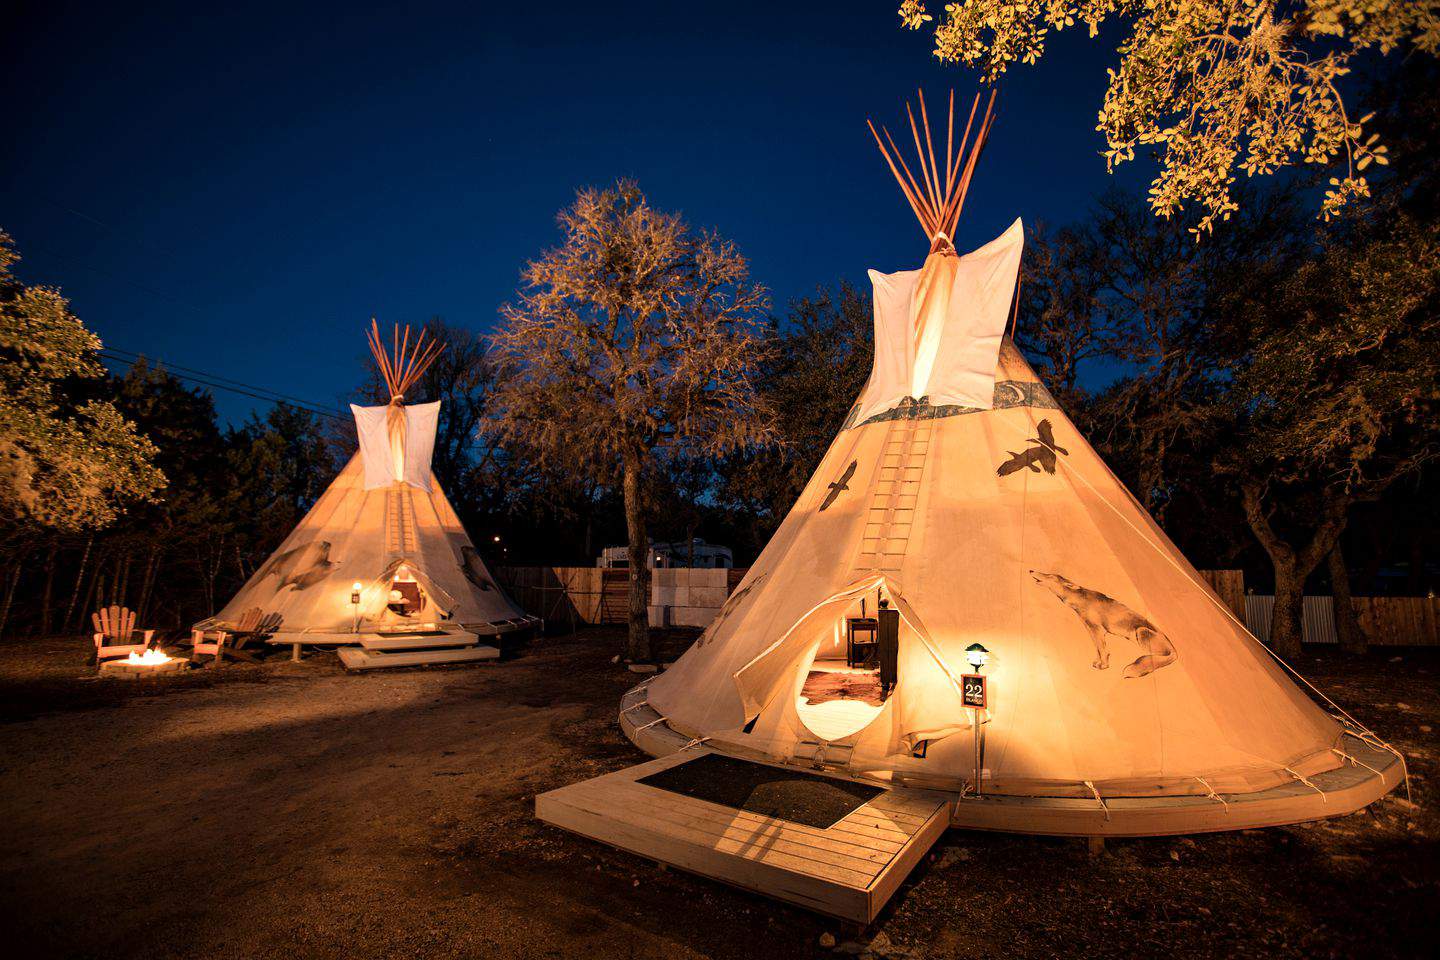 These are 9 glamping destinations are among the most popular in Texas